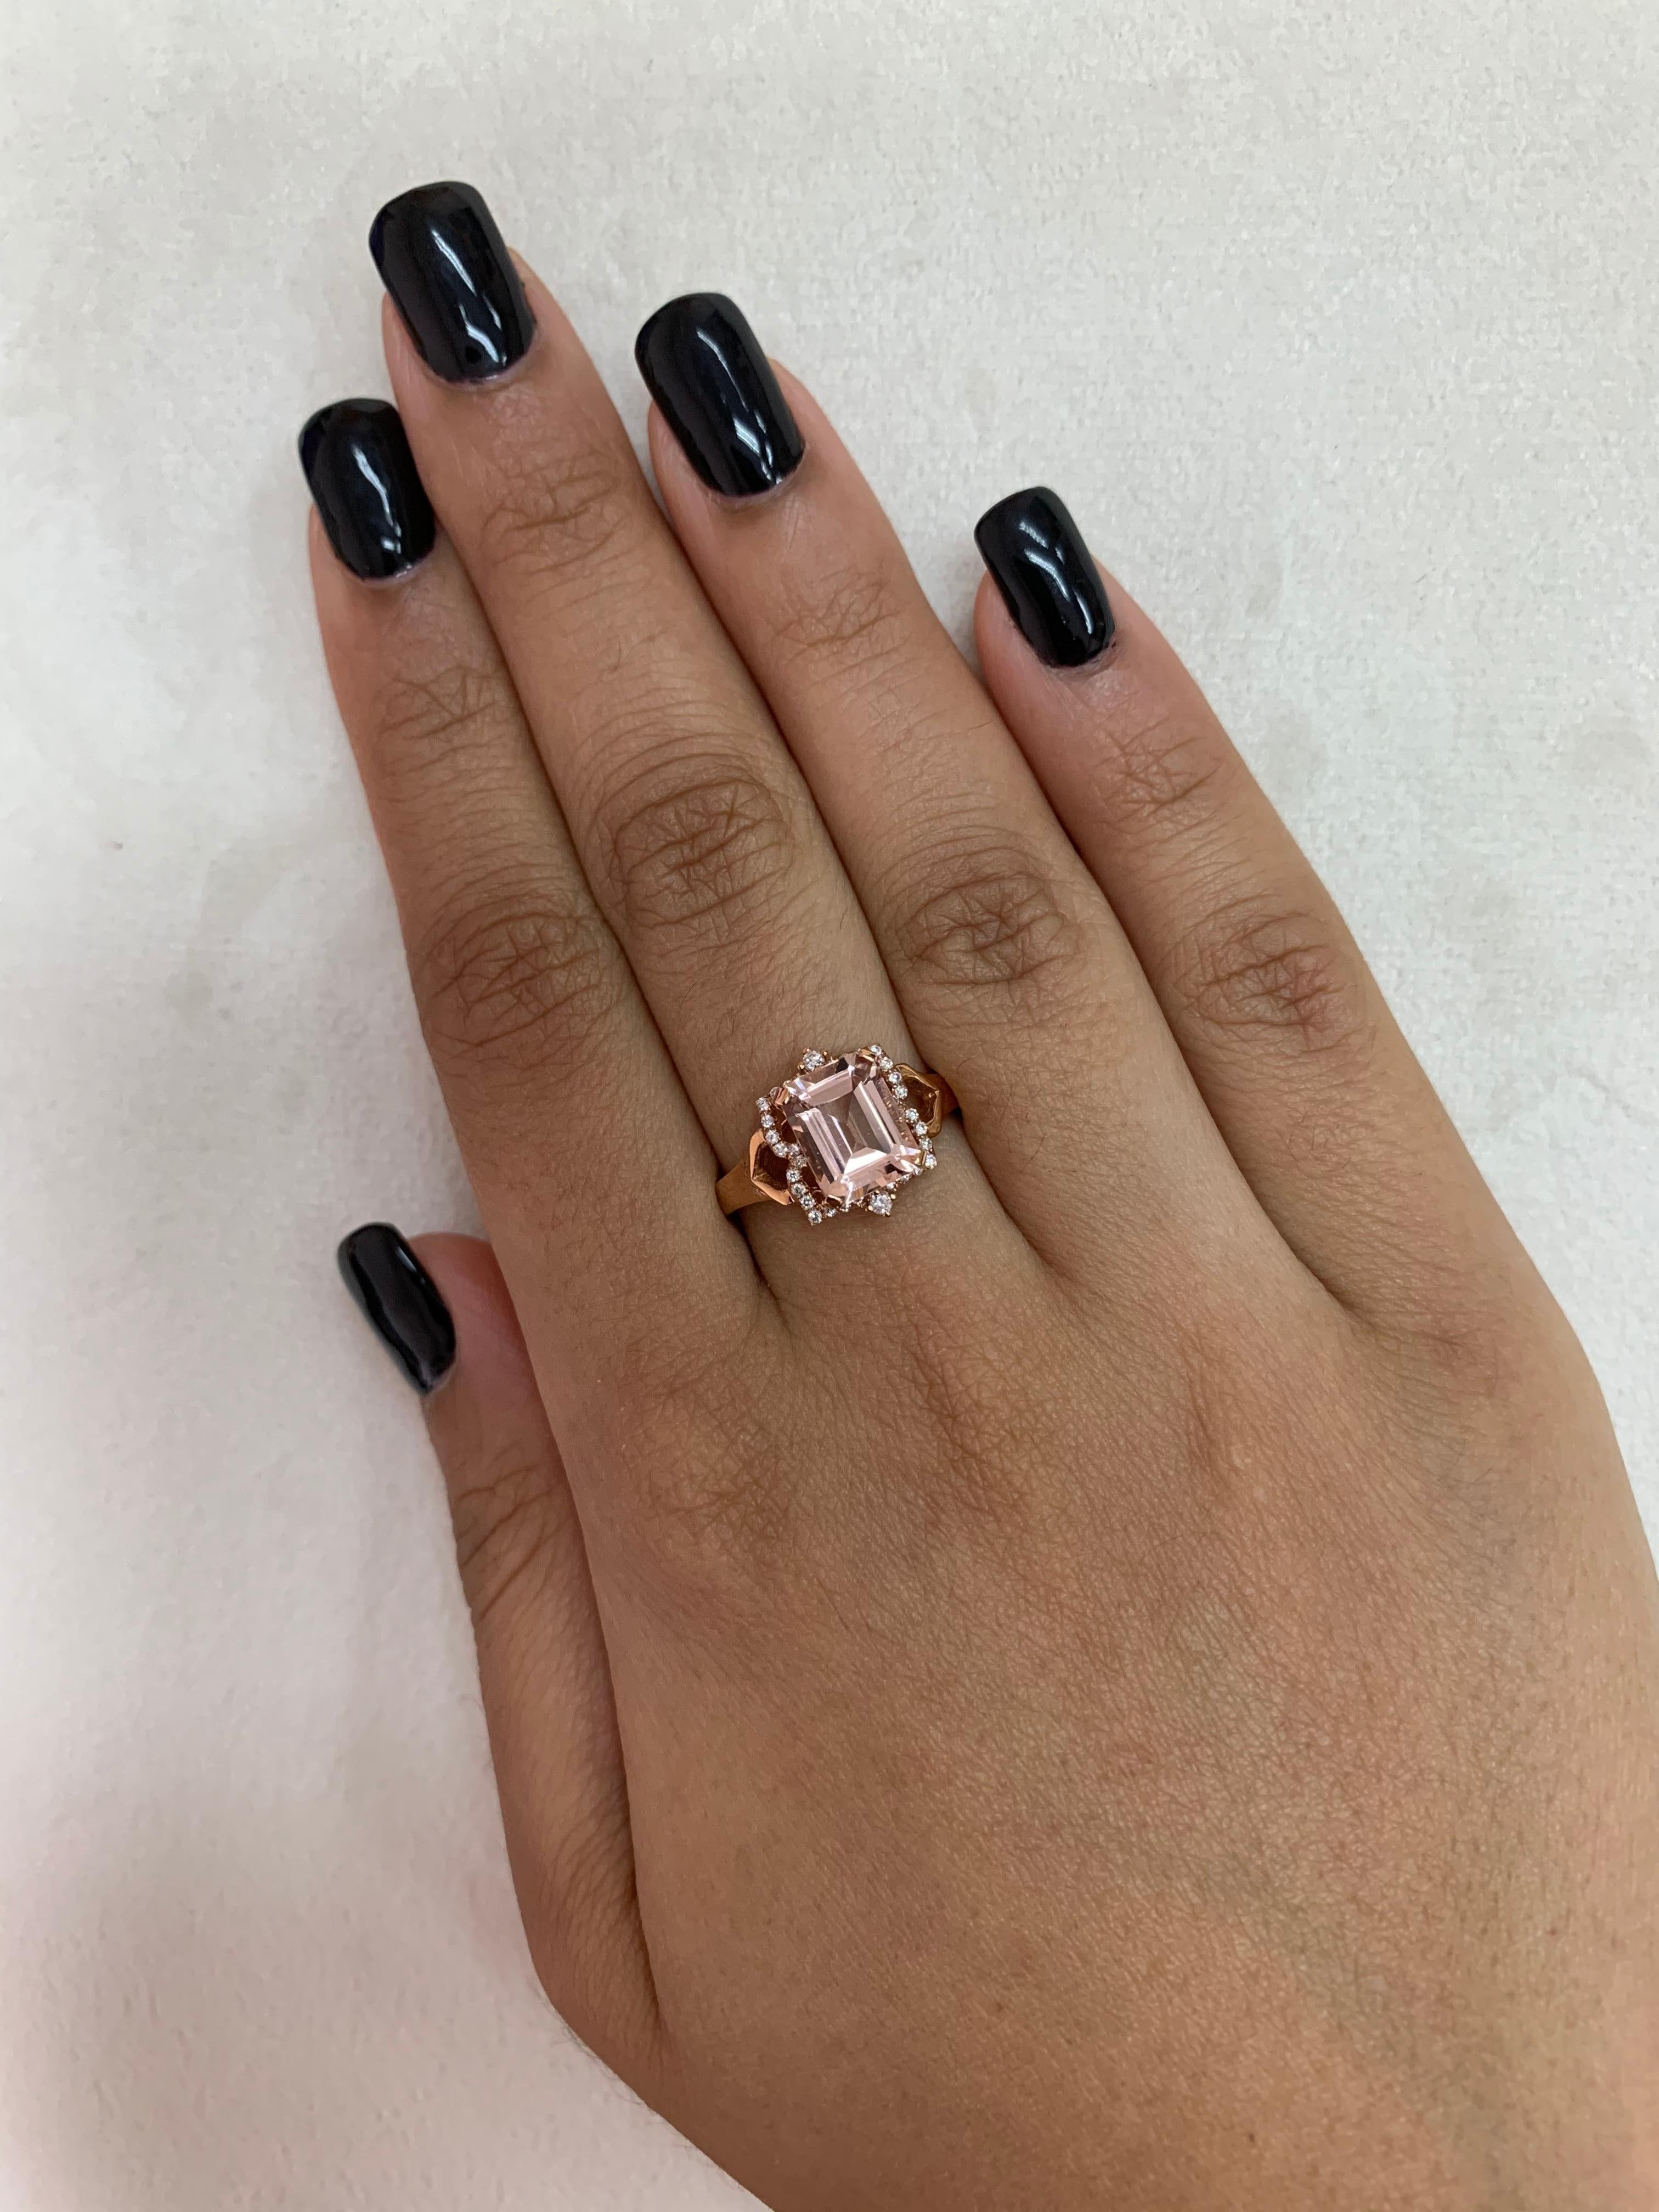 This collection features an array of magnificent morganites! Accented with diamonds these rings are made in rose gold and present a classic yet elegant look. 

Classic morganite ring in 18K rose gold with diamonds. 

Morganite: 1.99 carat octagon